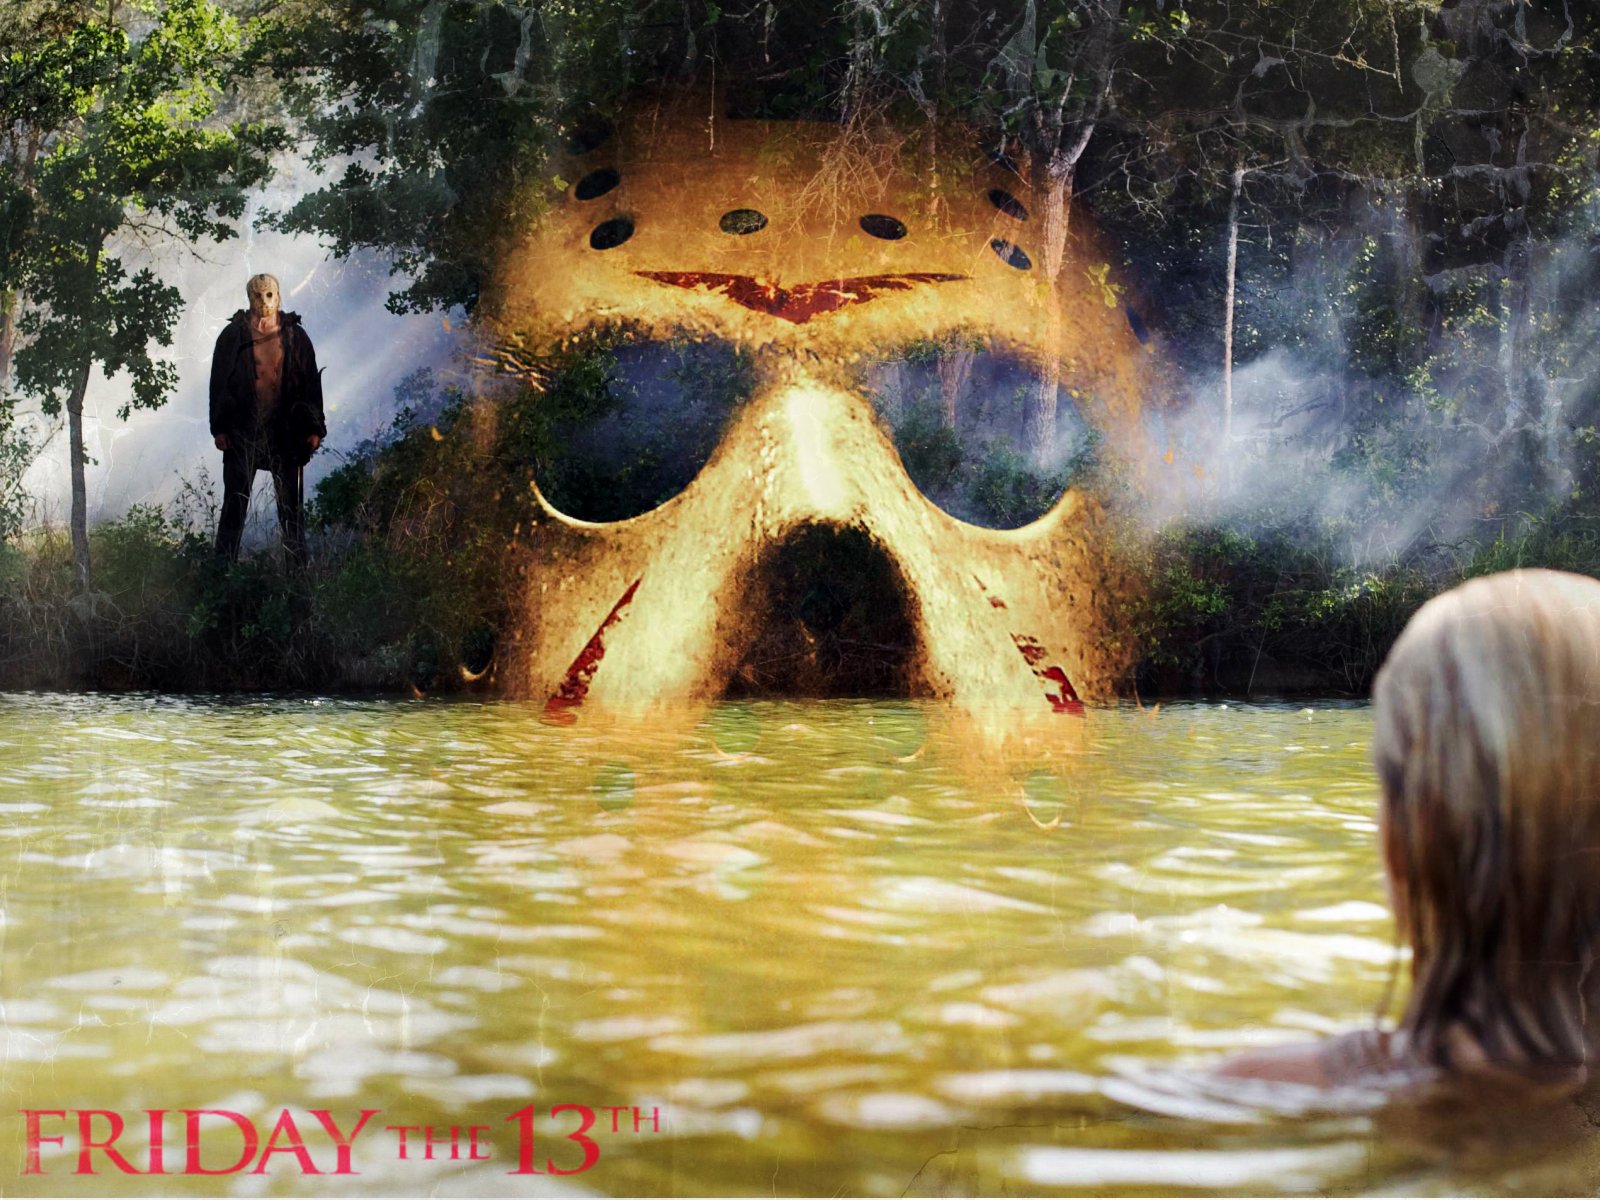 Friday the 13th 2009 - Horror Movies Wallpaper (23926925) - Fanpop